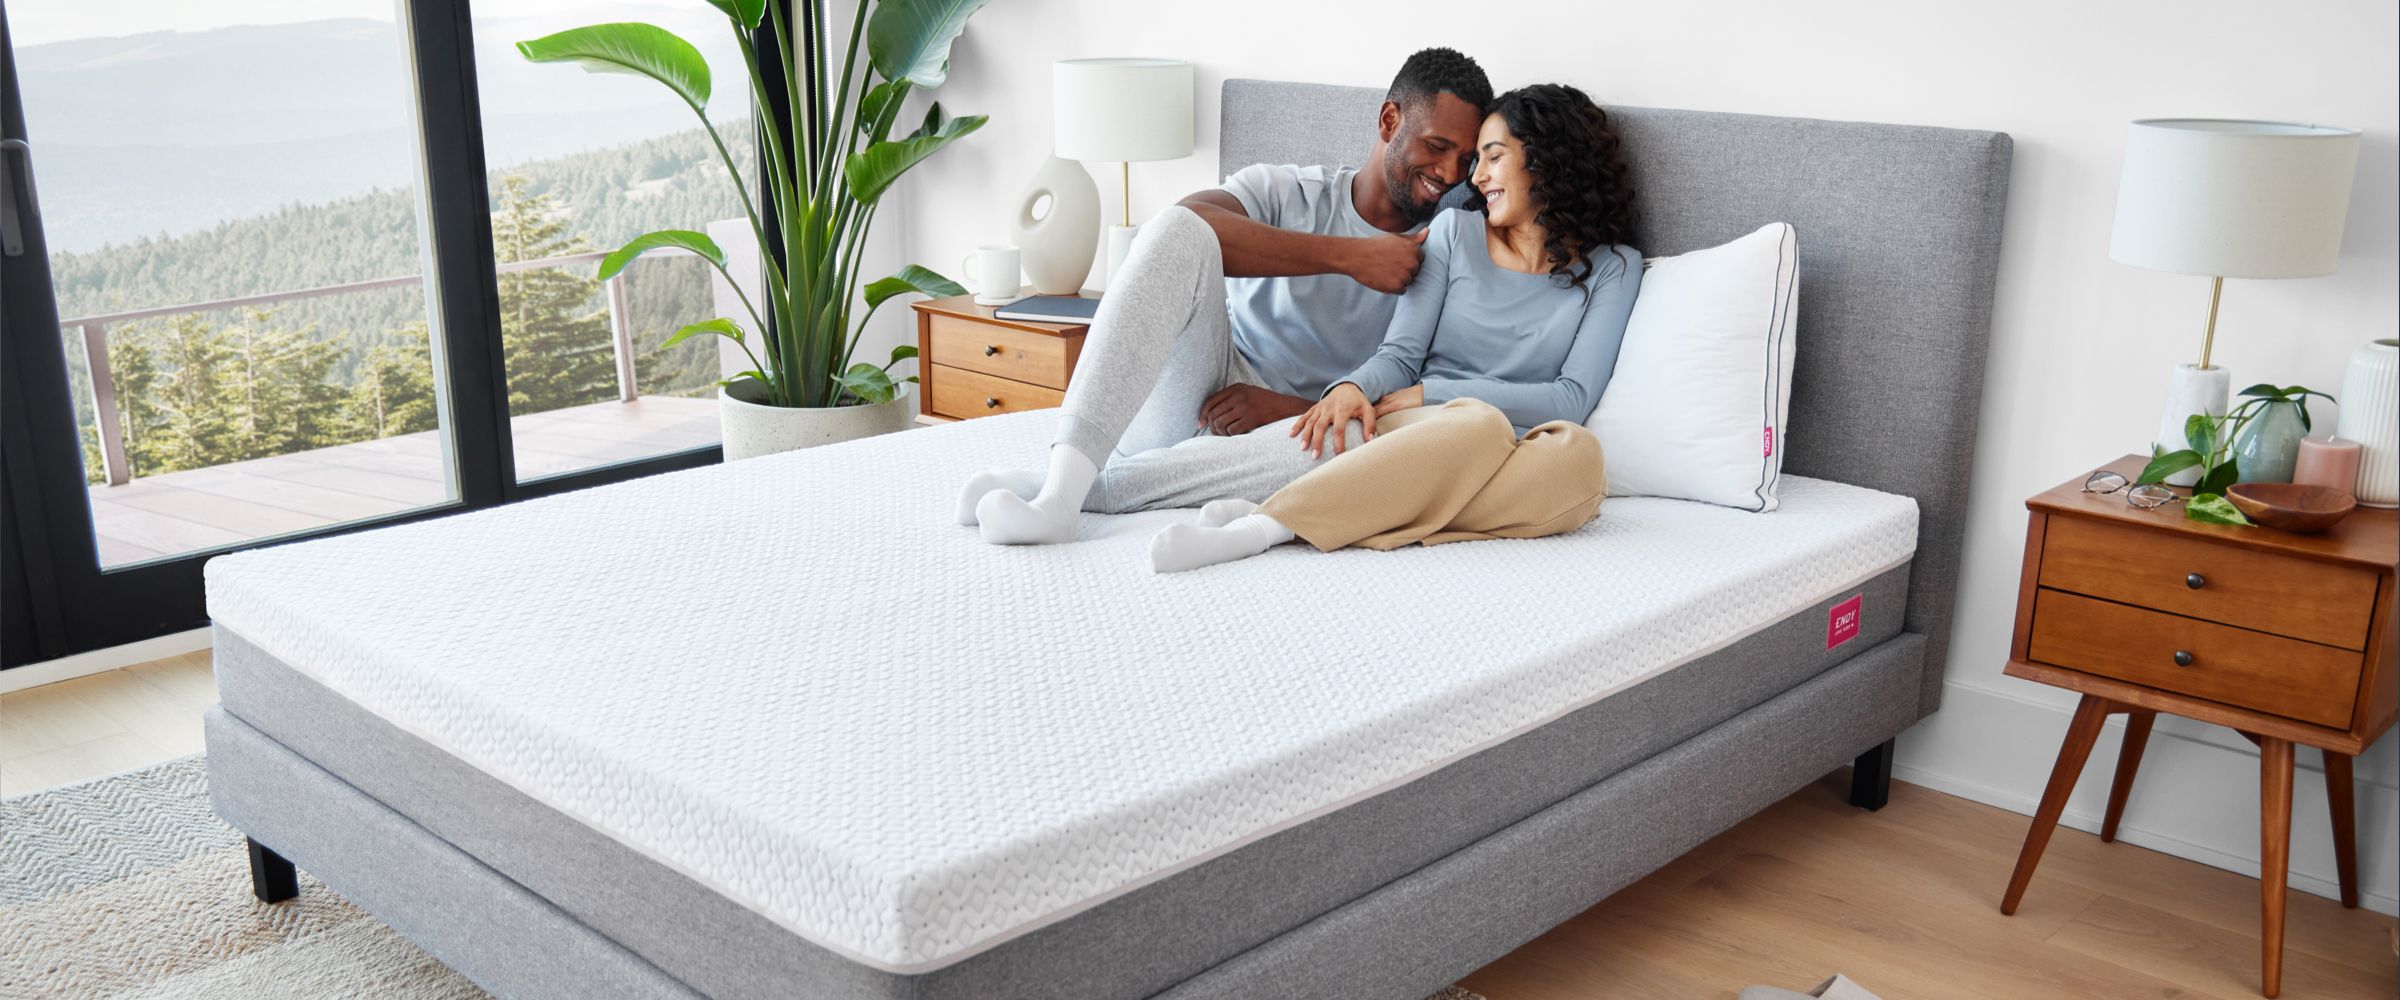 Two people relaxing on an Endy Mattress.